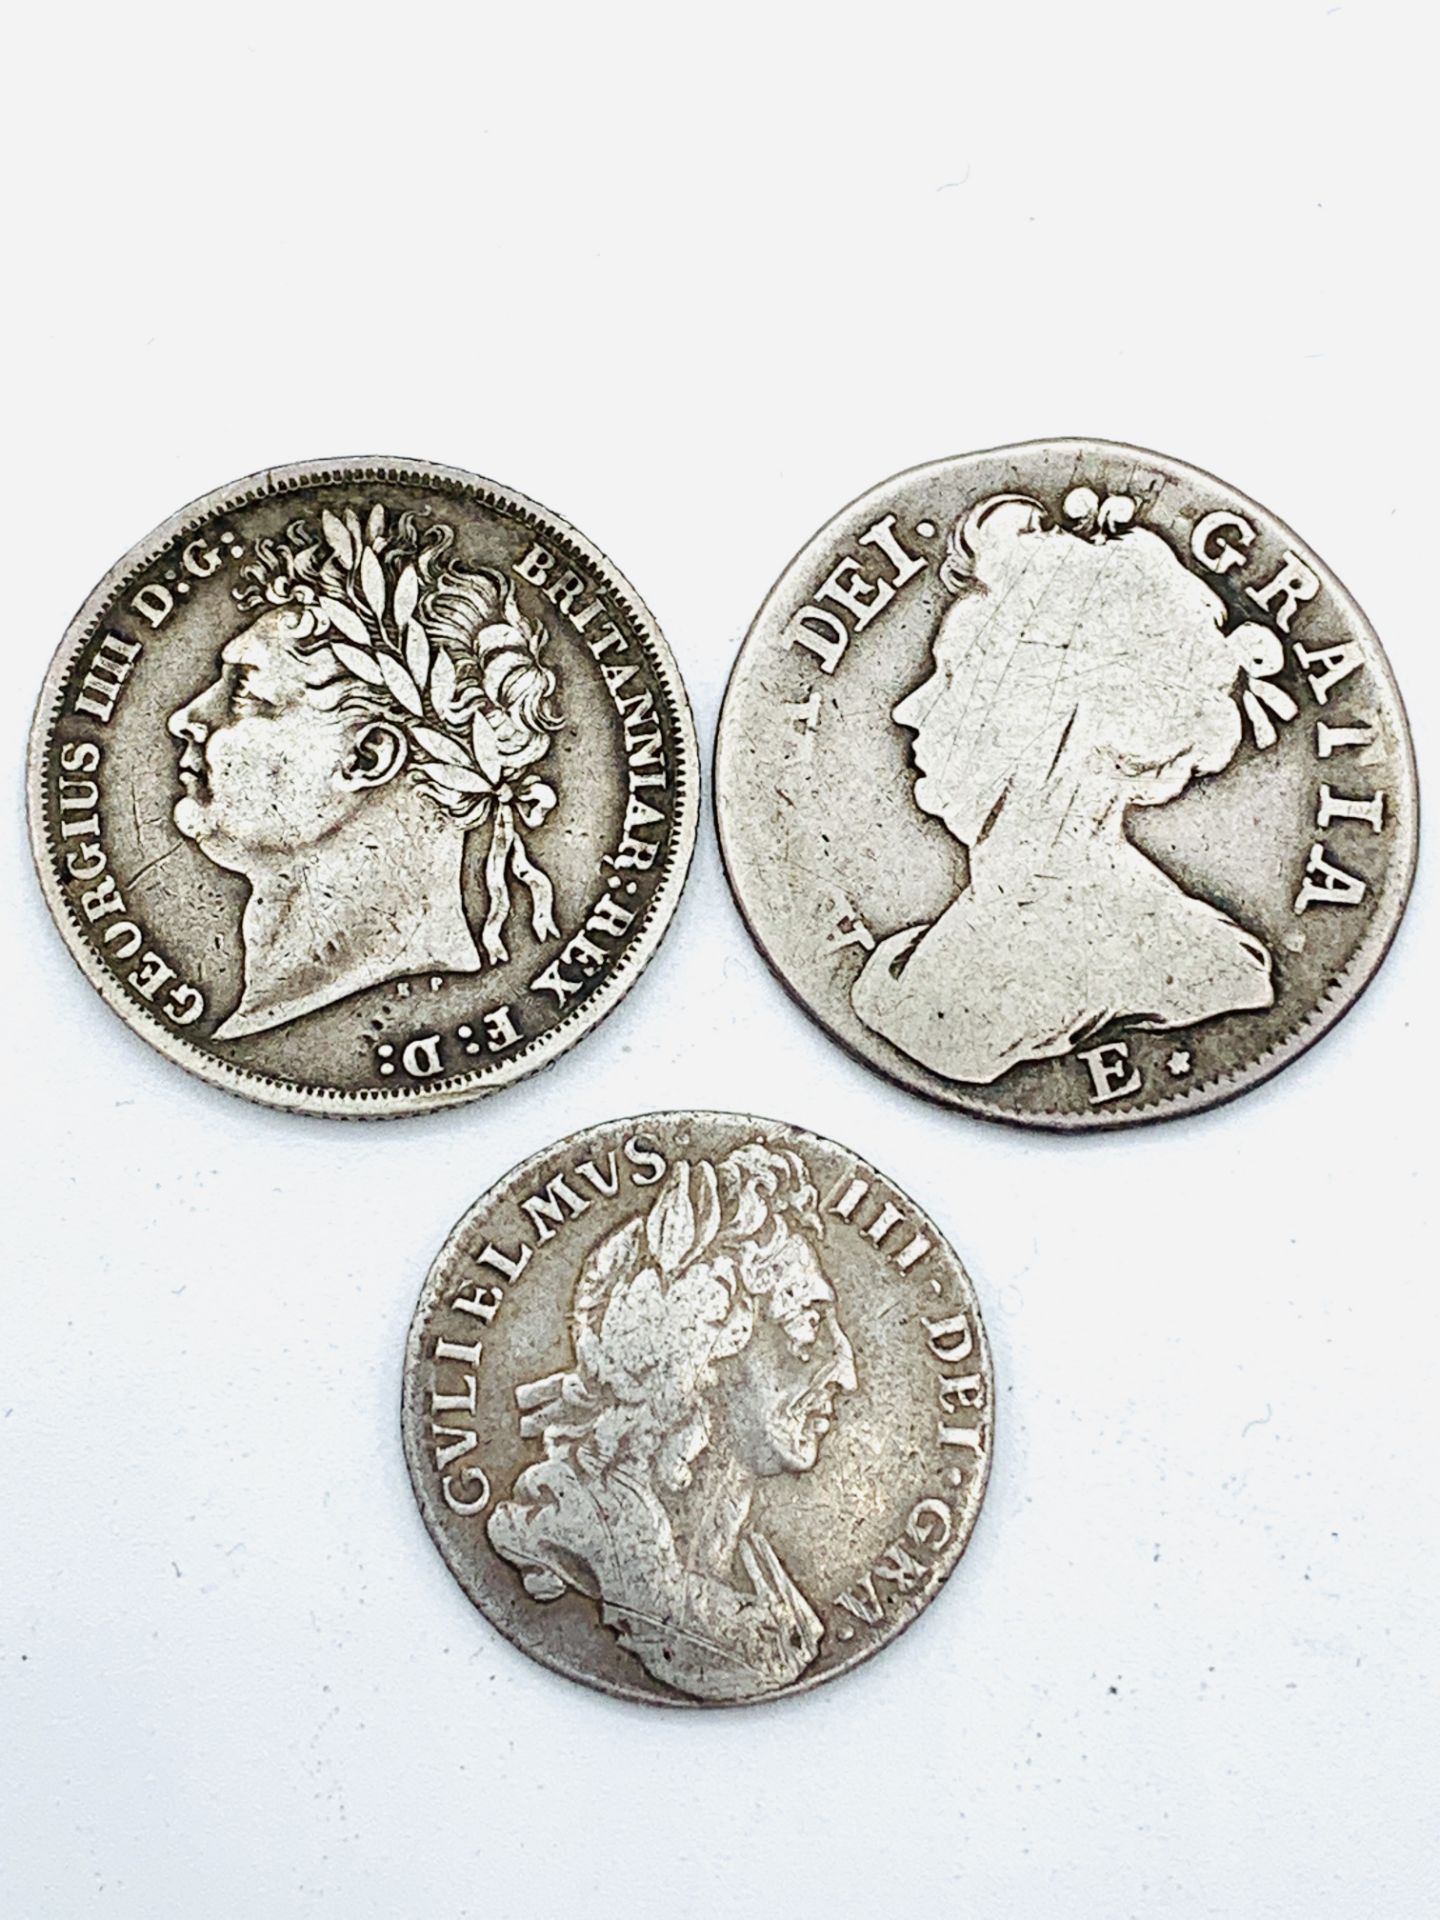 A Queen Anne sixpence 1708, a George IV shilling 1824 and a William III shilling